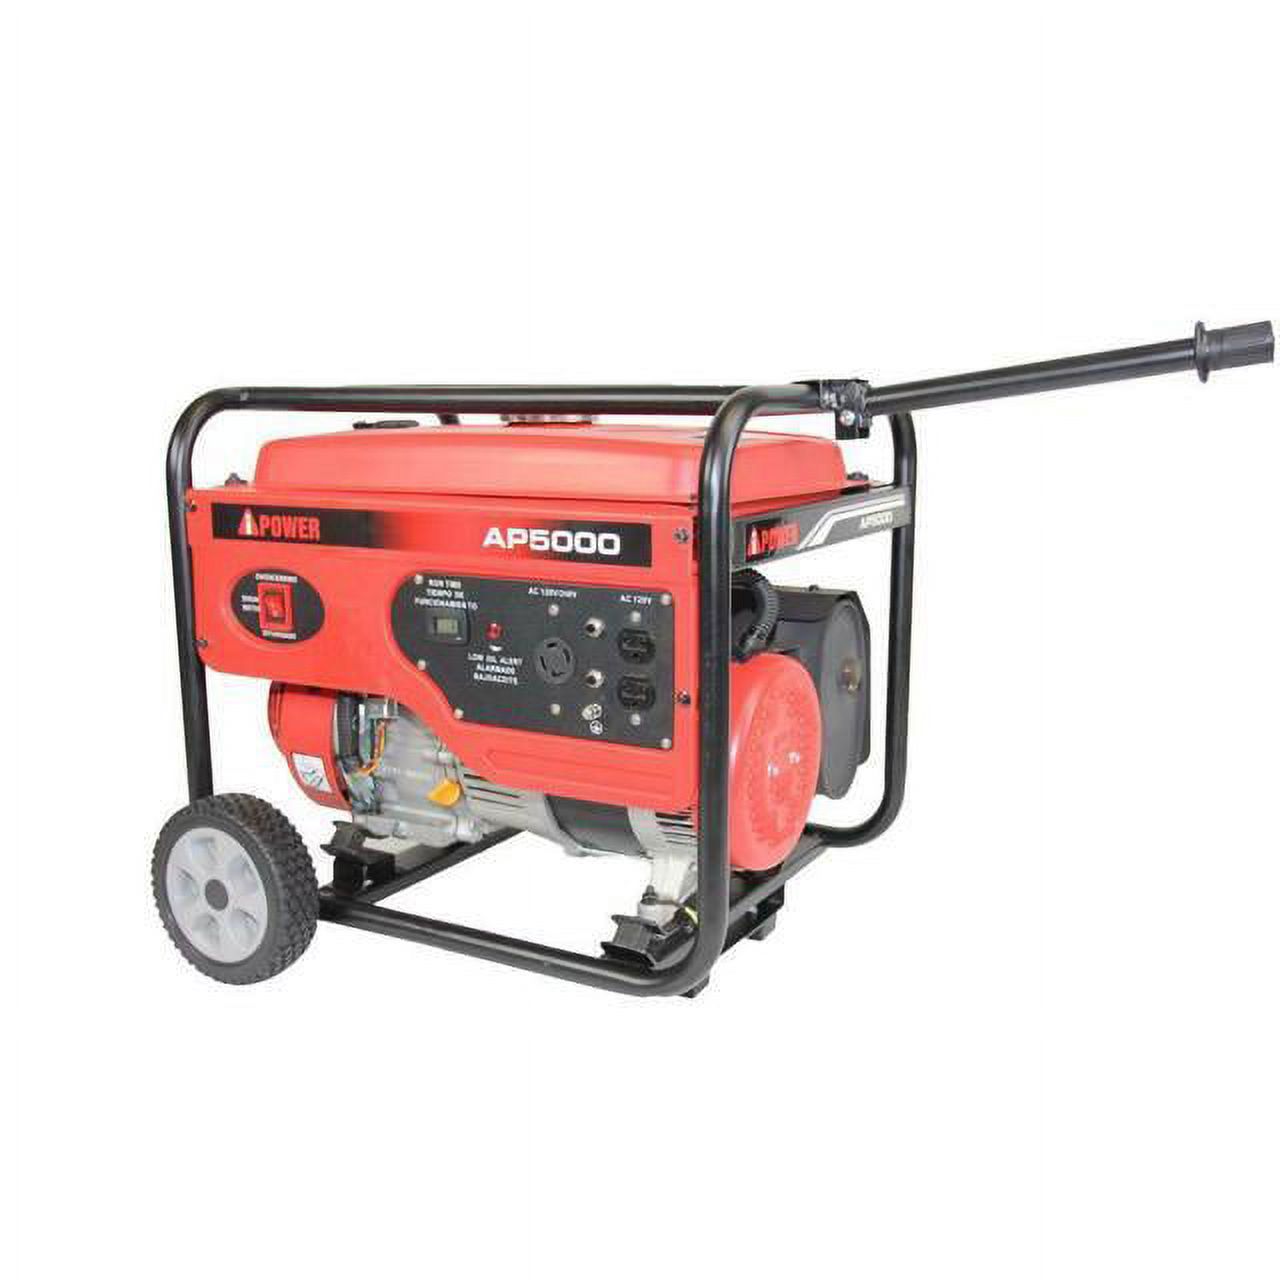 A-iPower AP5000 Gasoline Portable Generator W/ 5000W Starting Watts - image 2 of 5